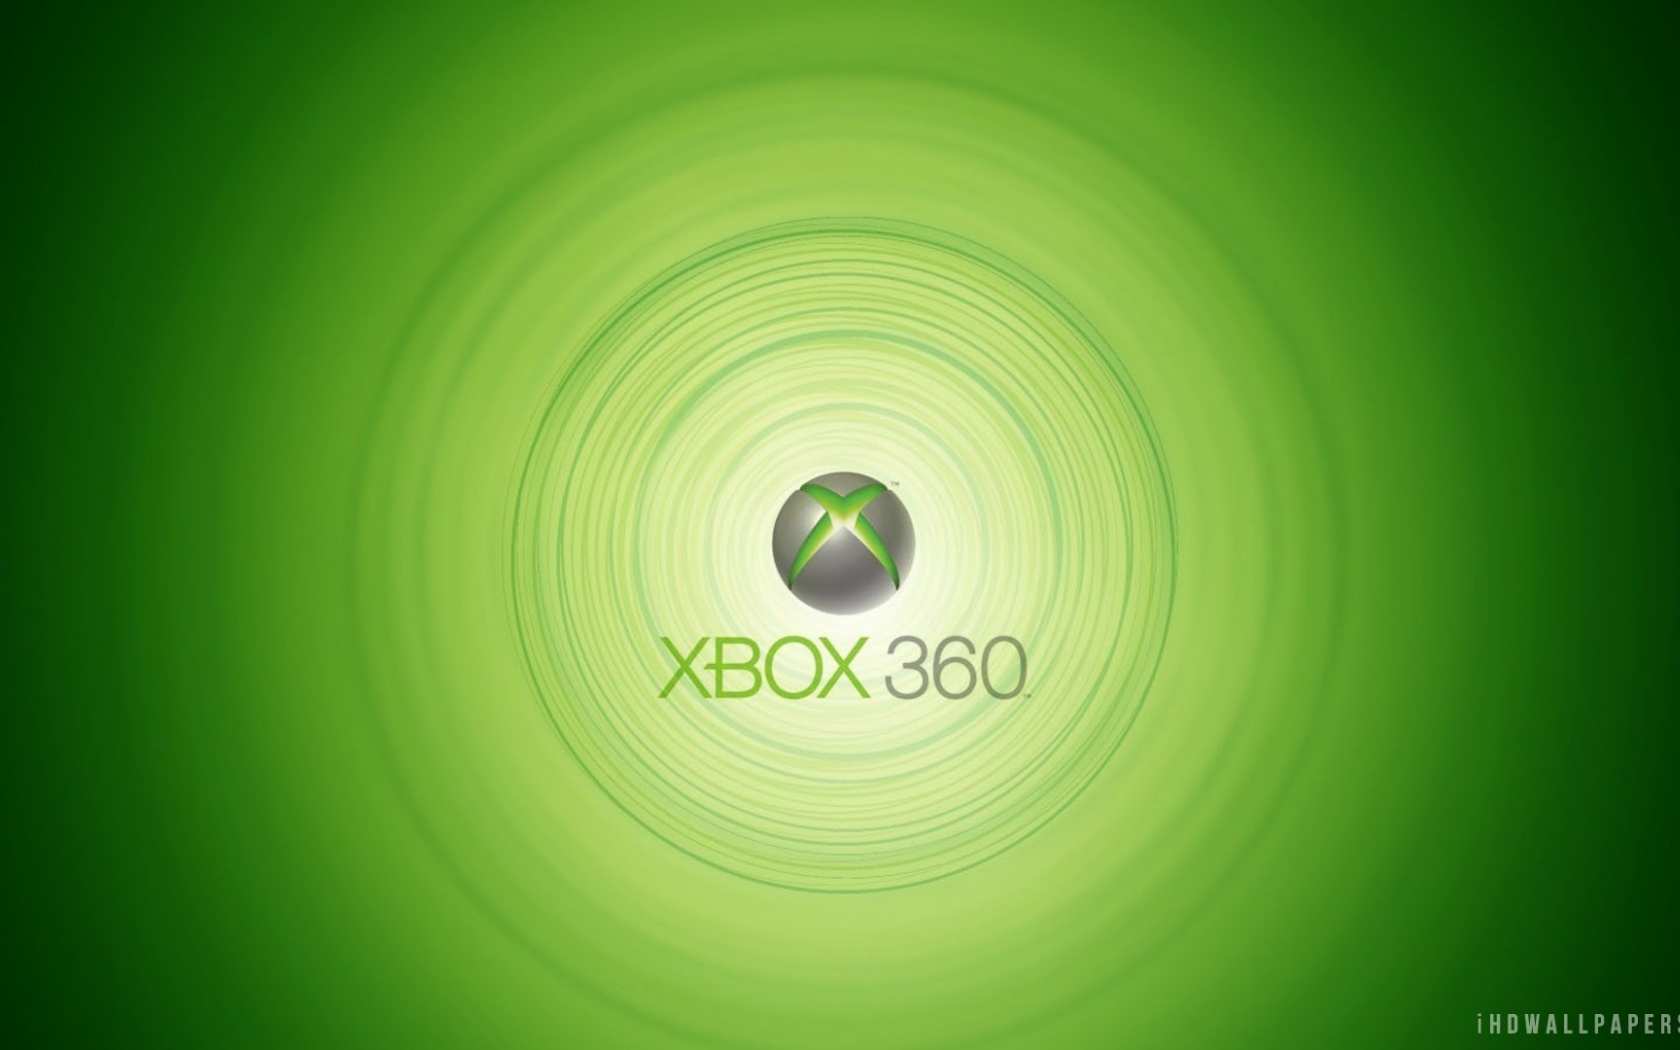 HD Xbox Kinect Wallpaper For Your